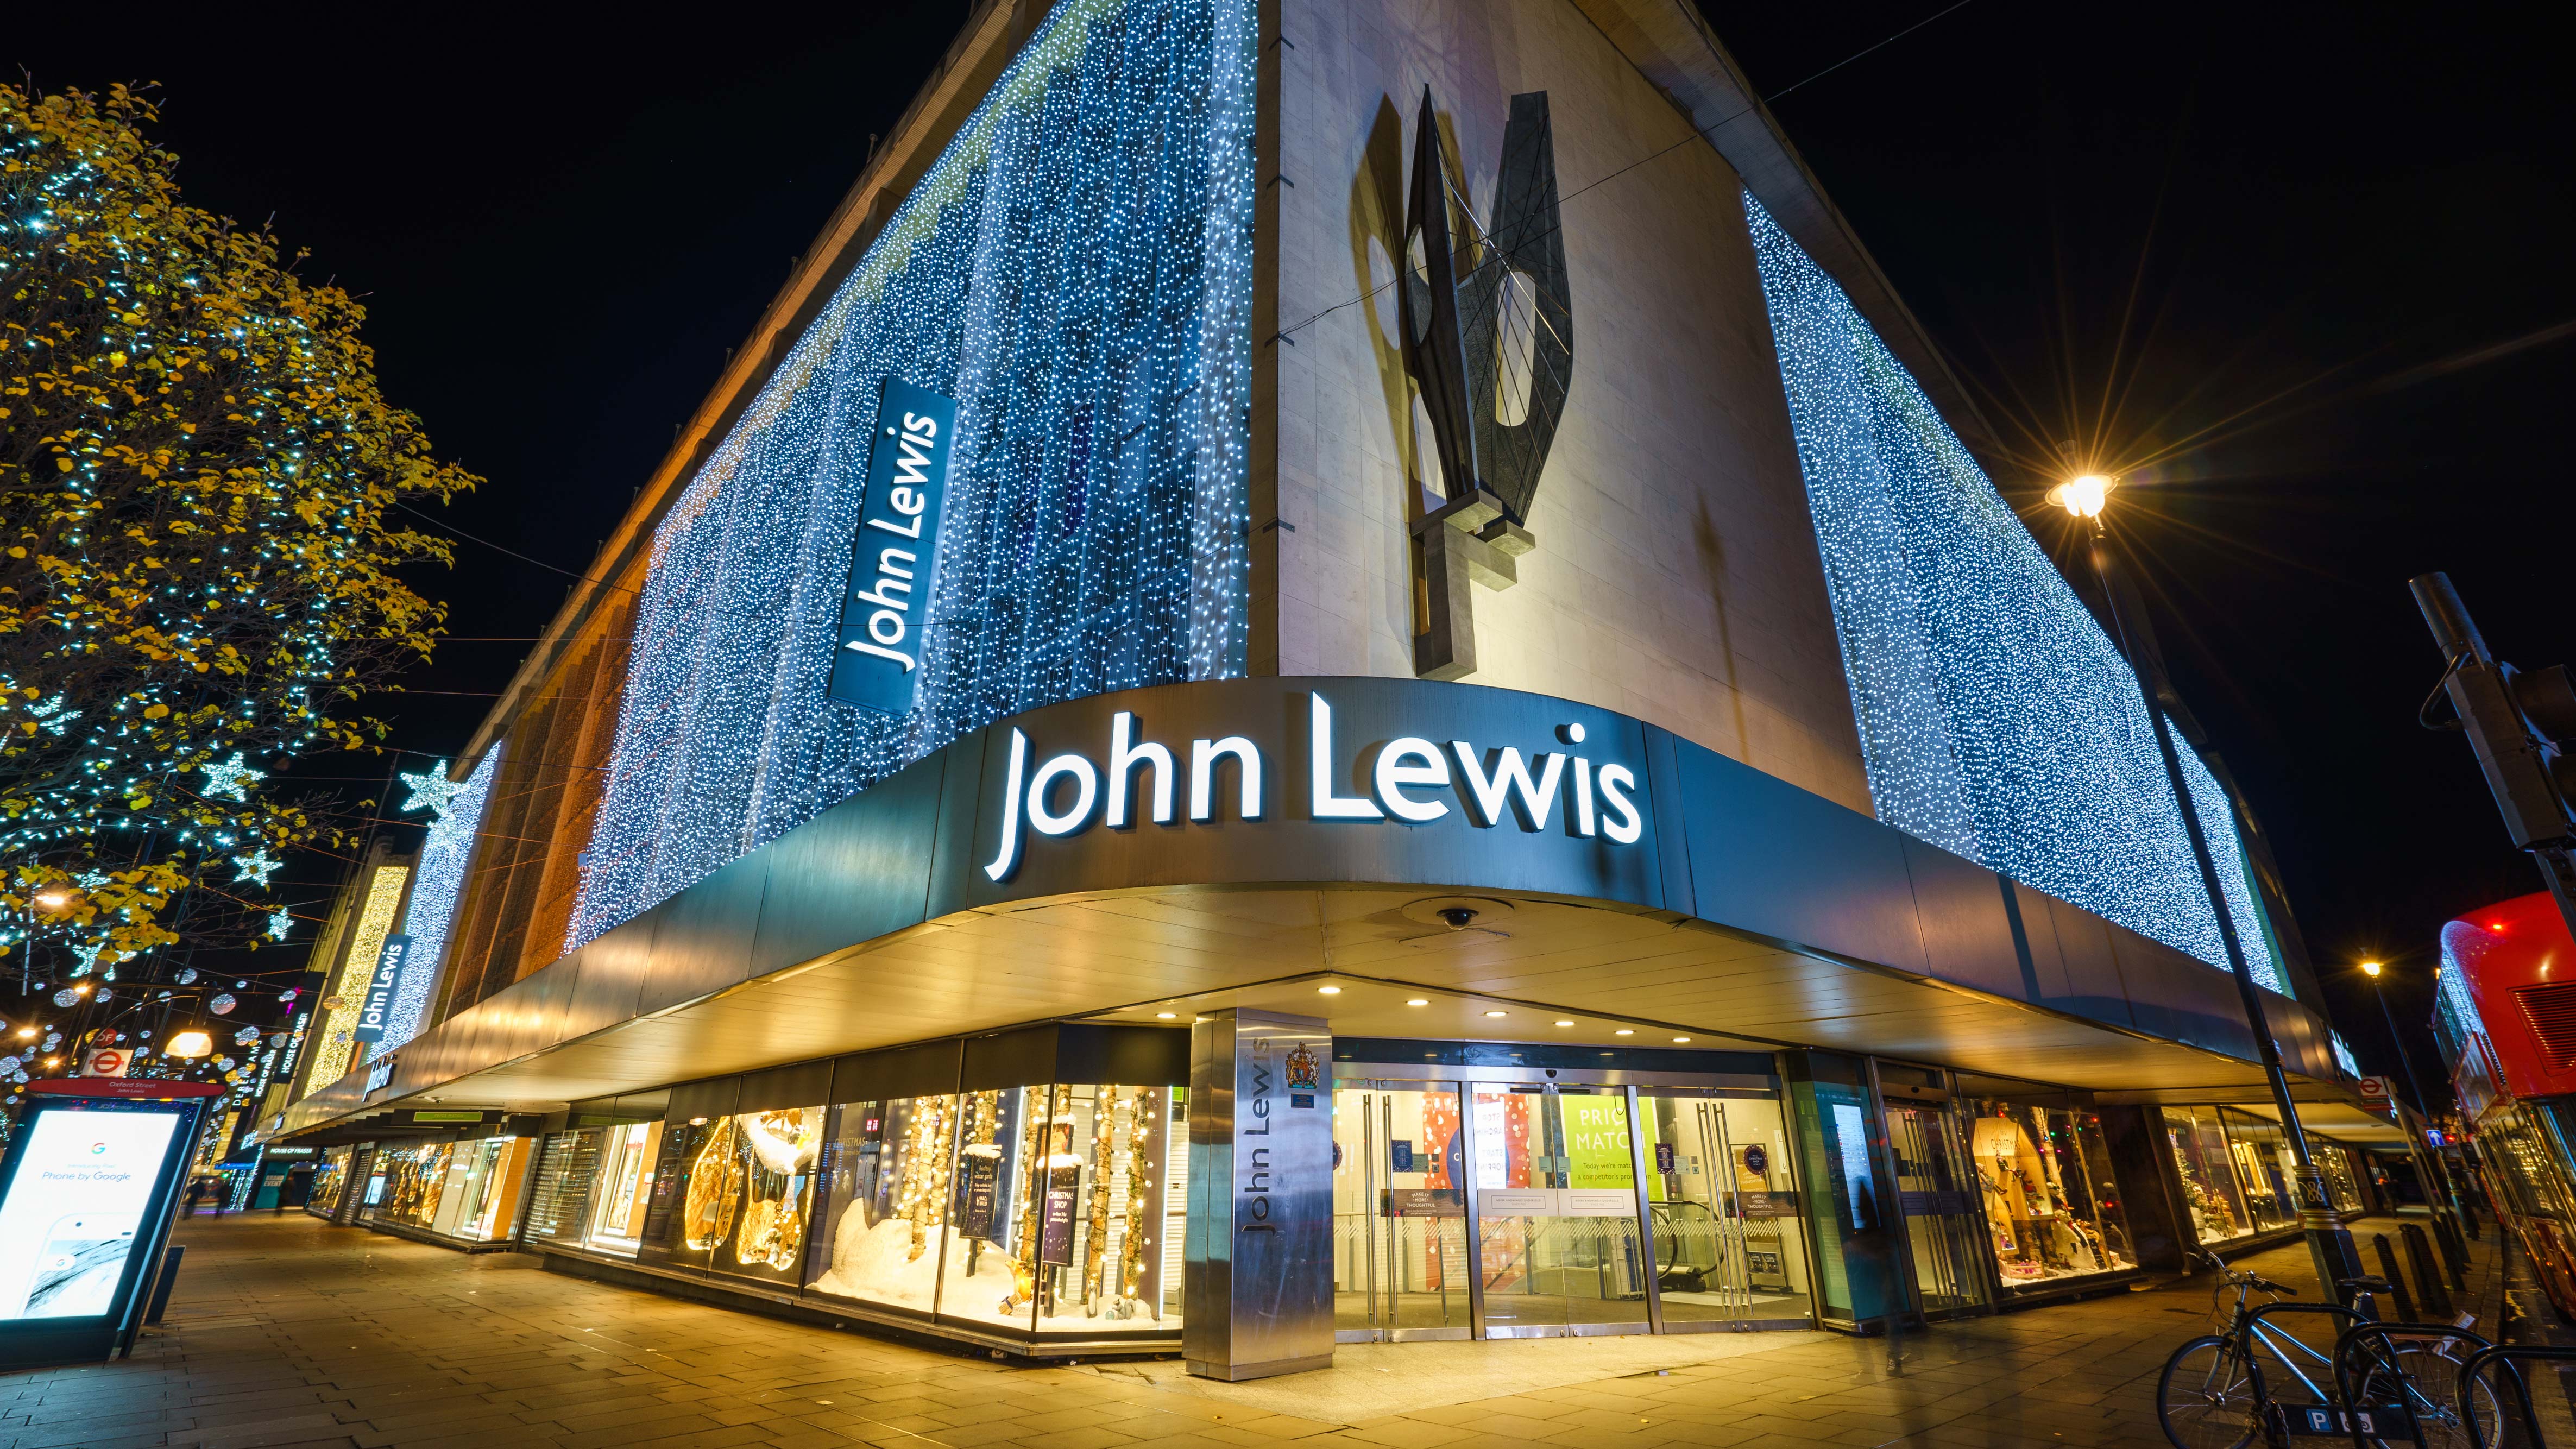 A John Lewis storefront lit up with lots of small lights